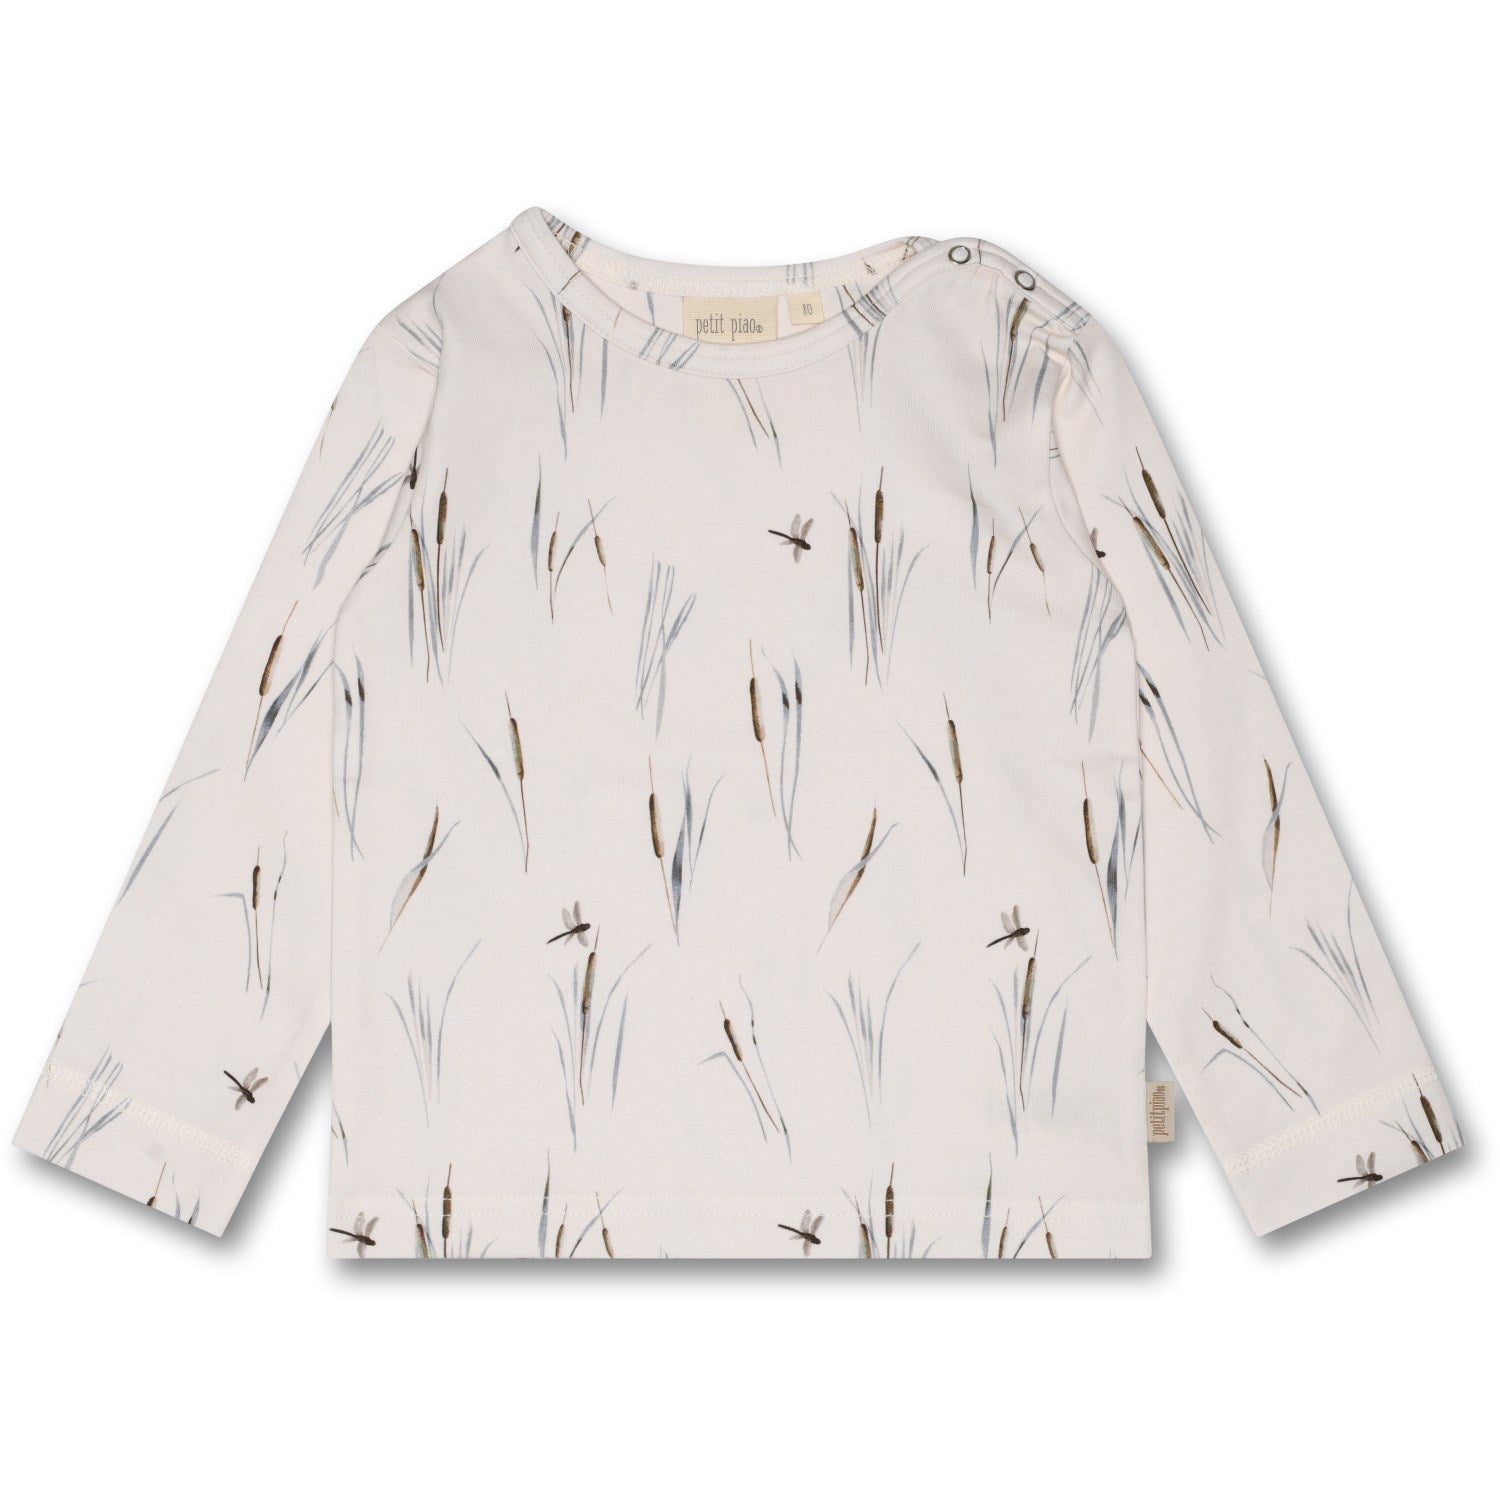 Petit Piao® Cattail Blus Printed